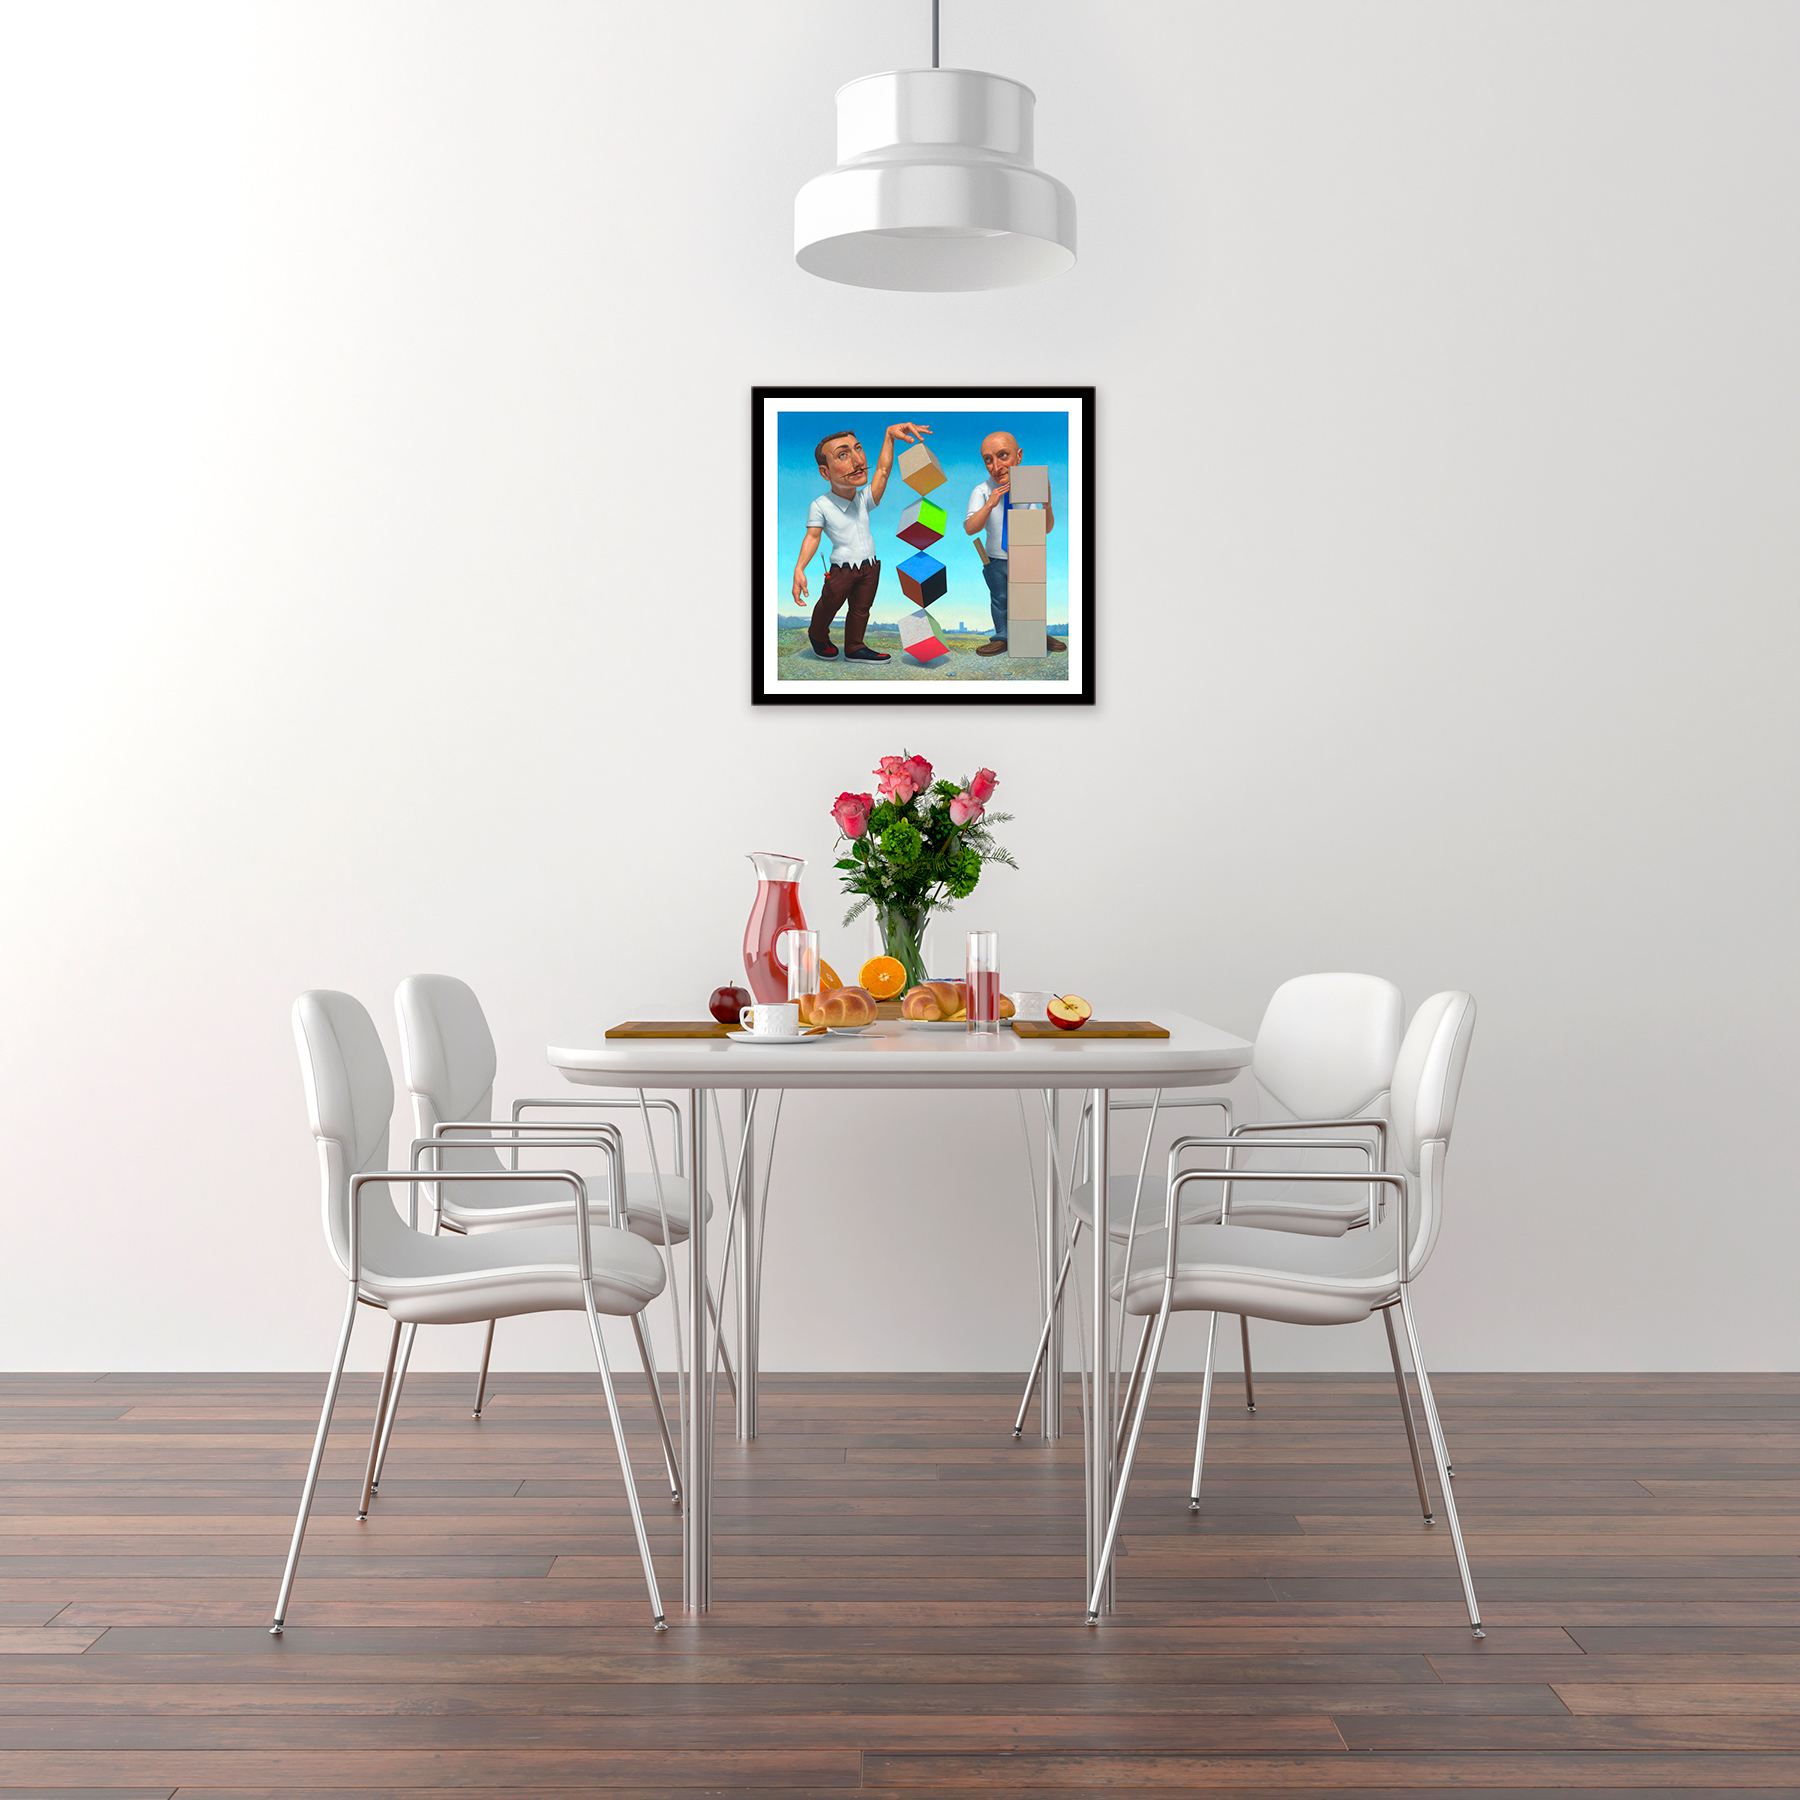 Classic white interior design kitchen table furniture feature large art print 'the conceptualists'